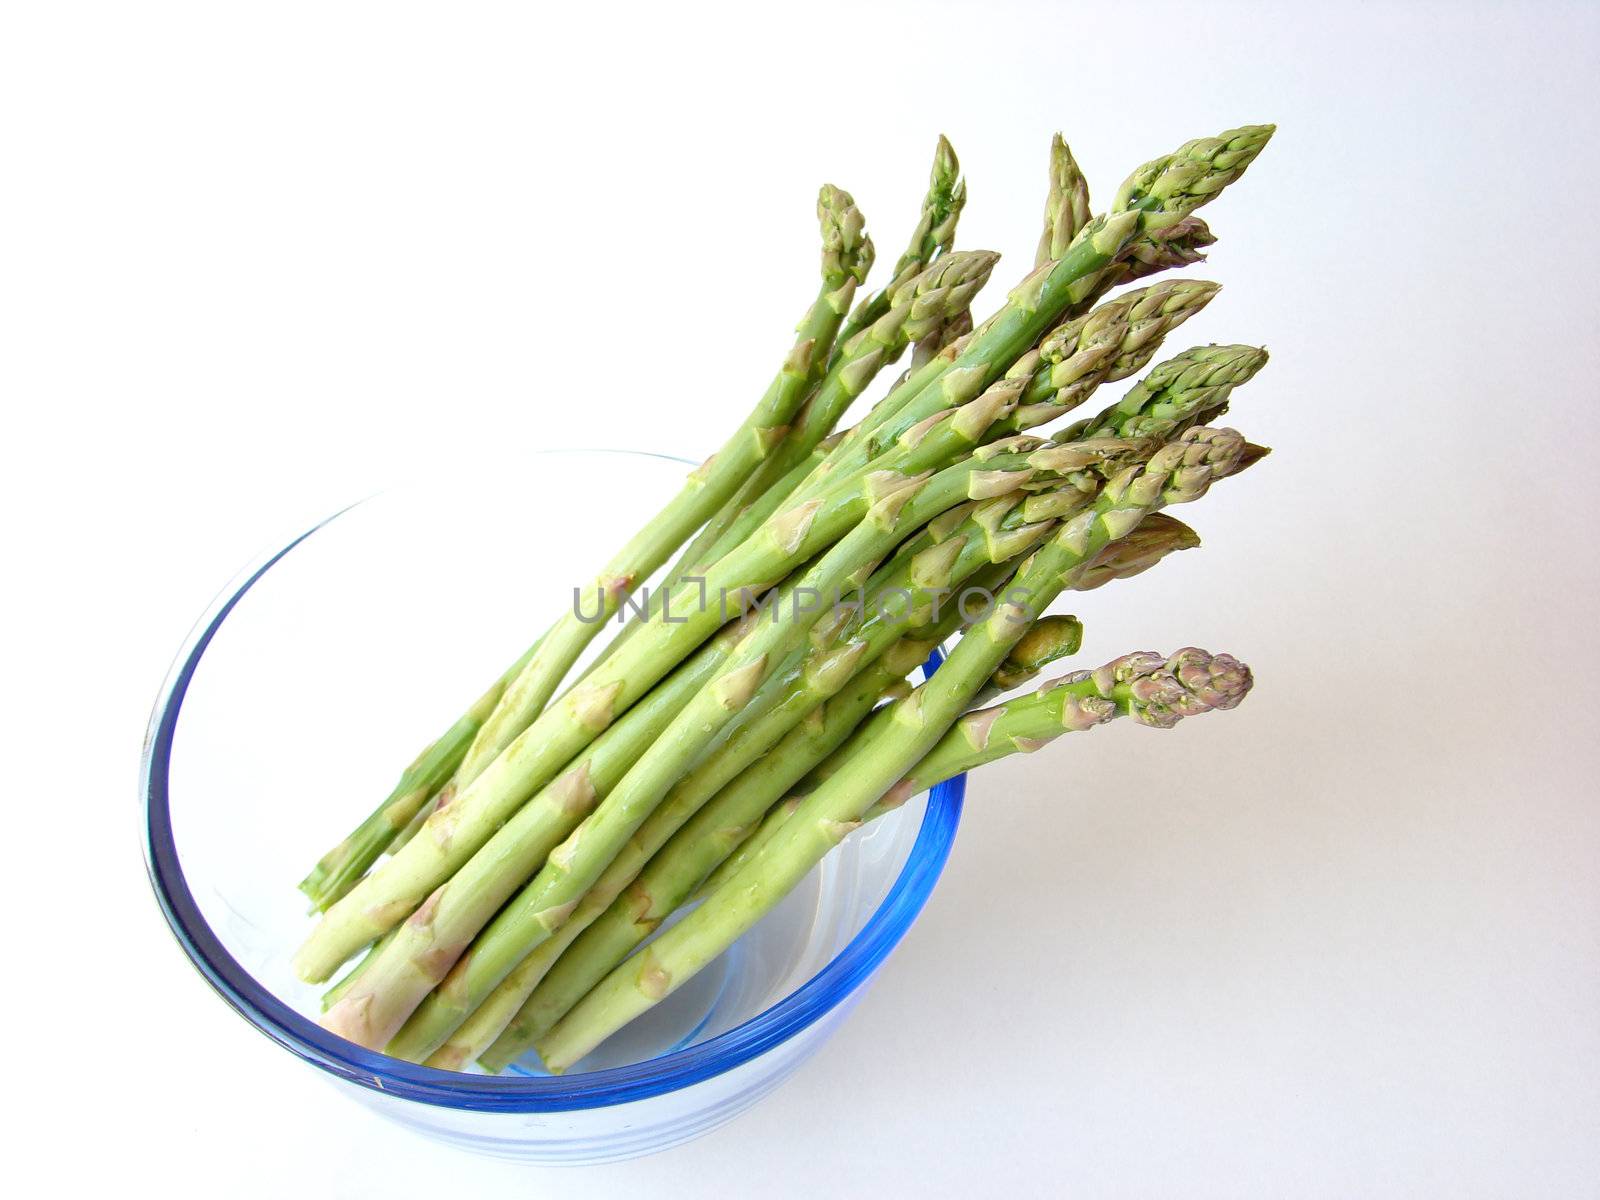 Bunch of asparagus in a bowl ready to cook, on white background